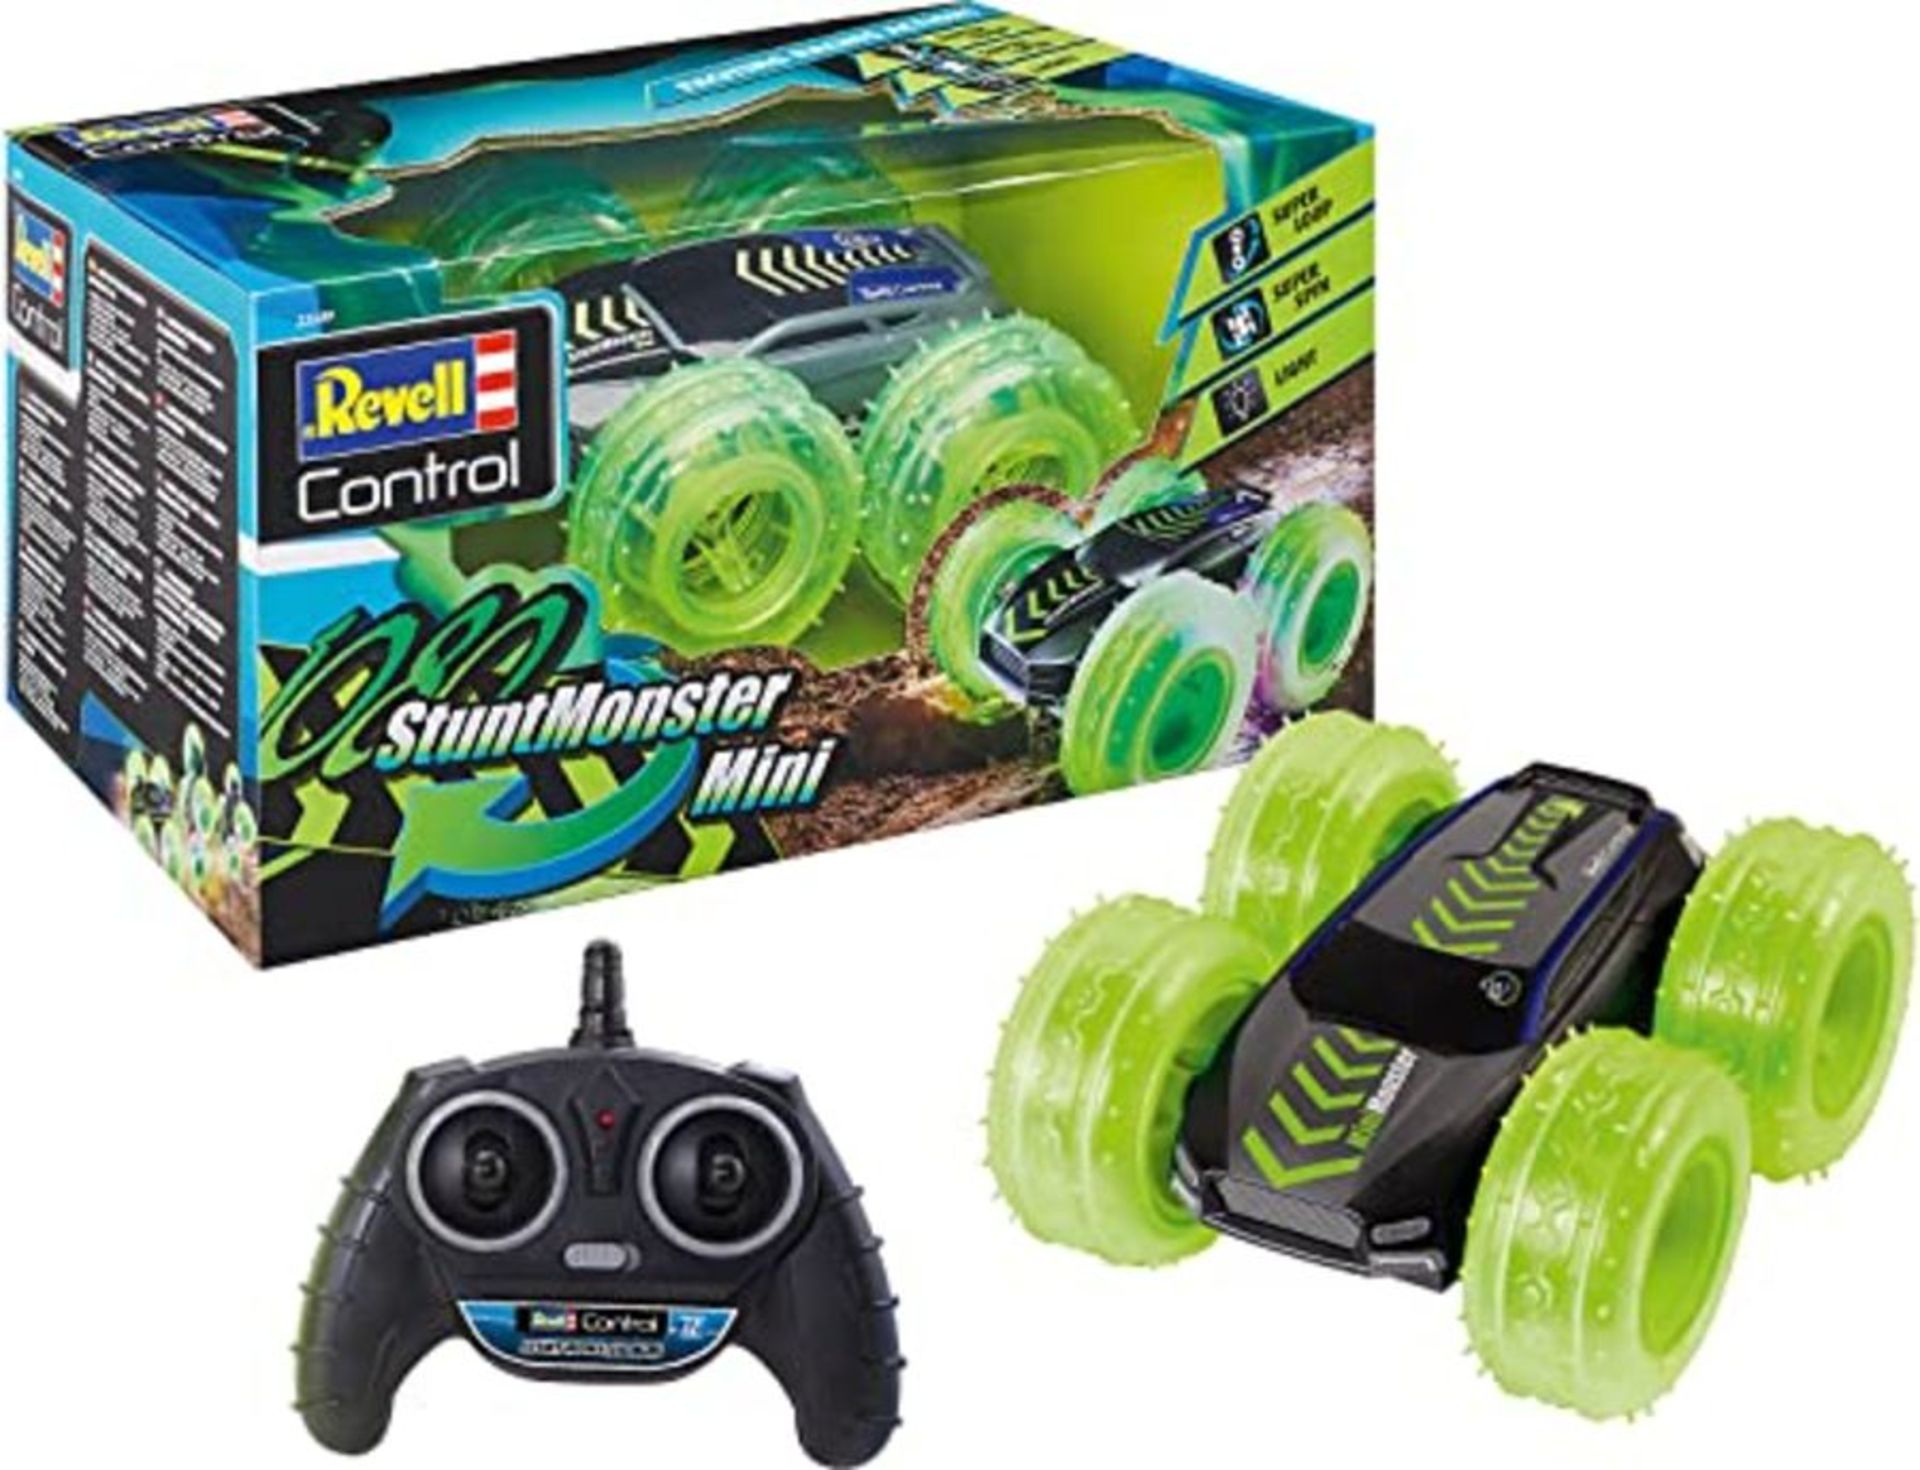 Revell Control 23509 RC Car Stunt Monster 1080 Mini, 2.4GHz, 4WD 4WD, with rollover fu